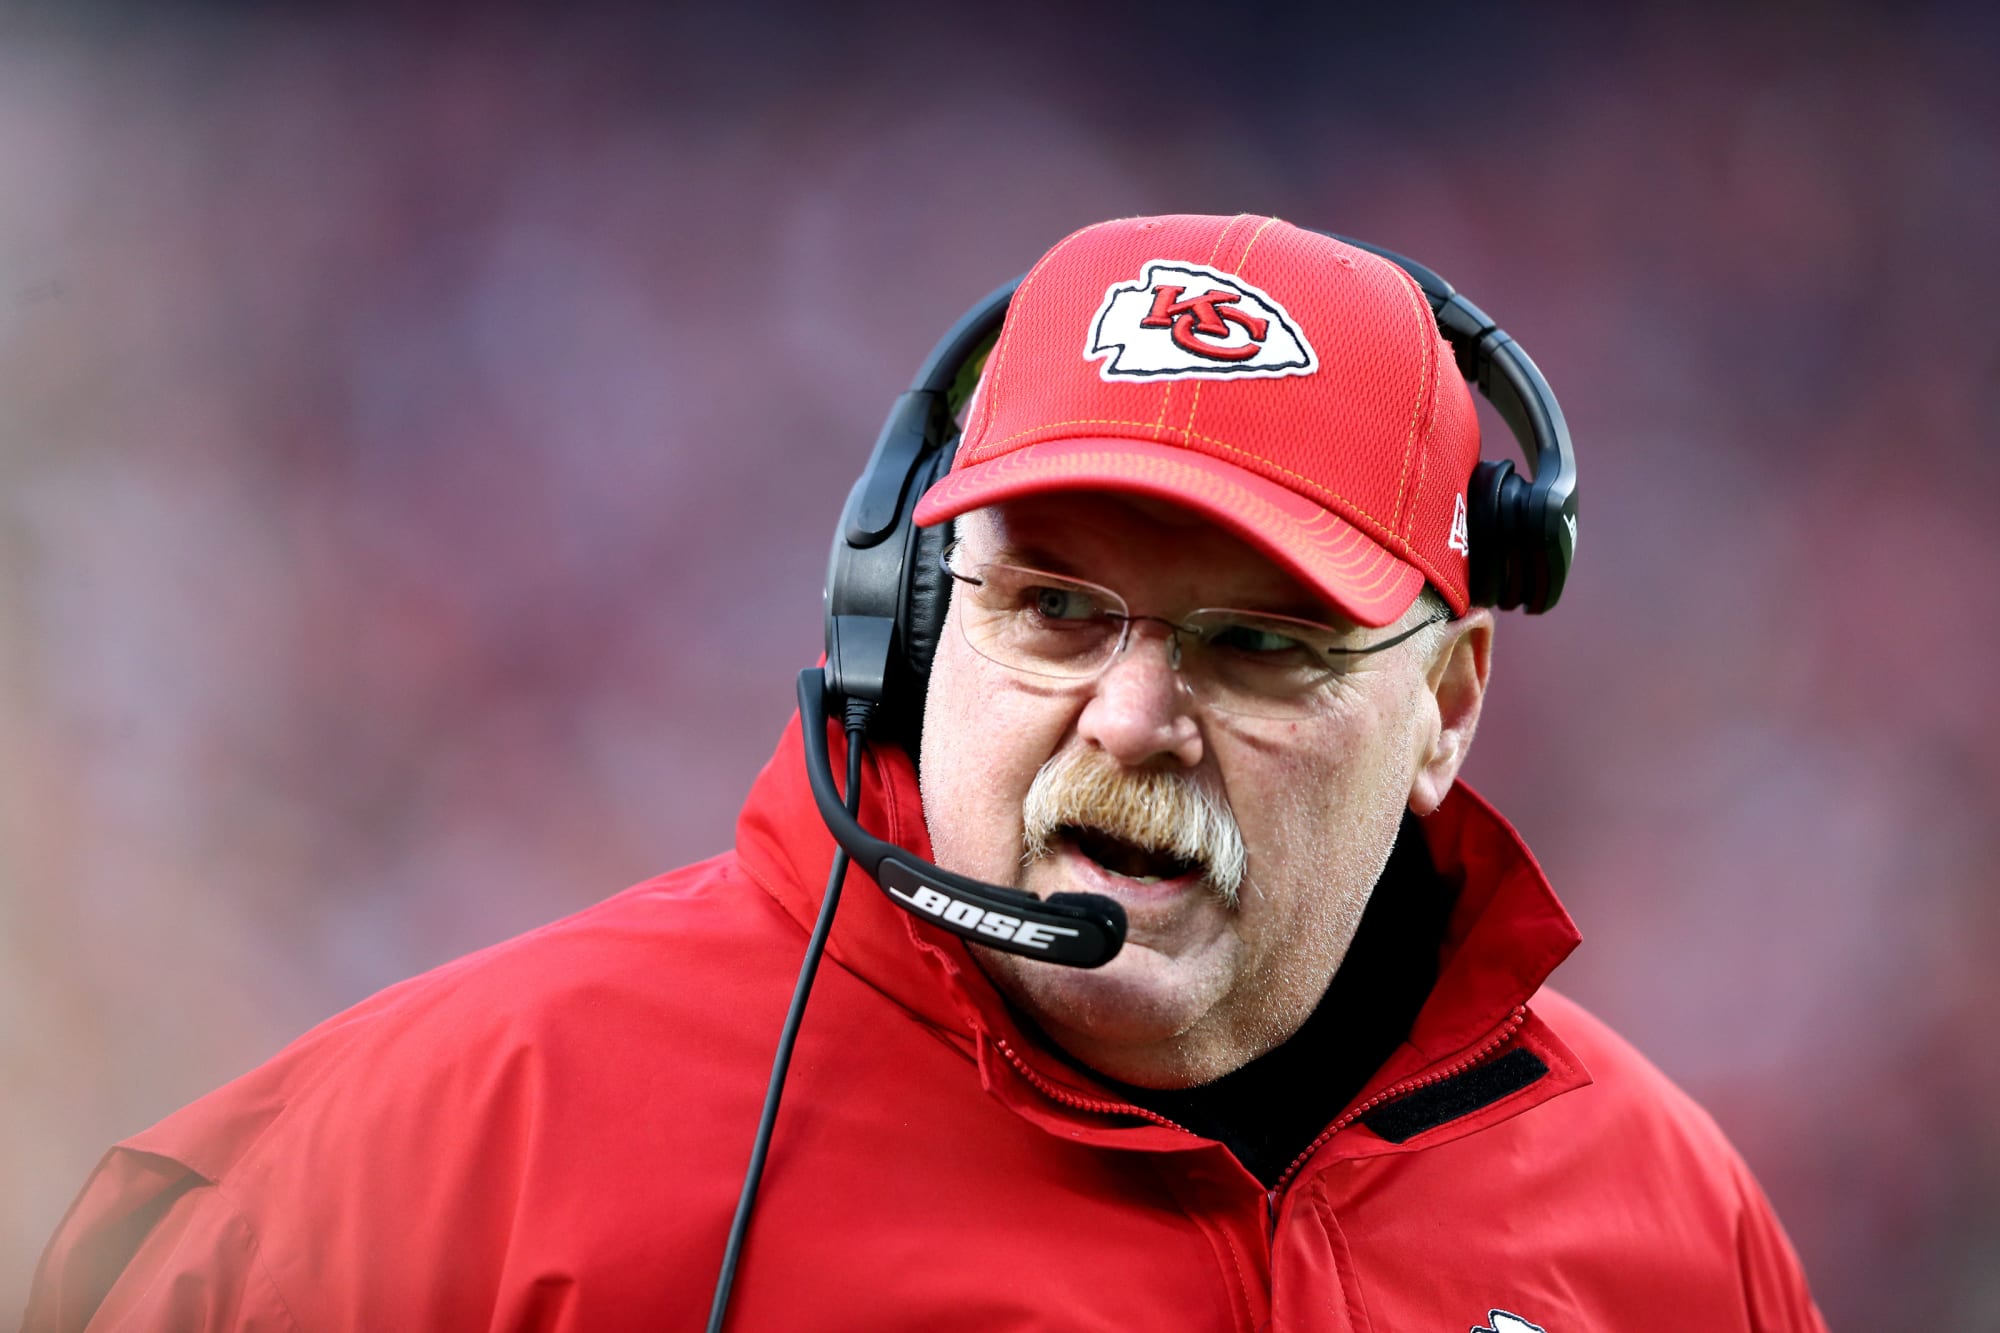 Chiefs head coach Andy Reid fully supports Black Lives Matter movement - NFL Hype